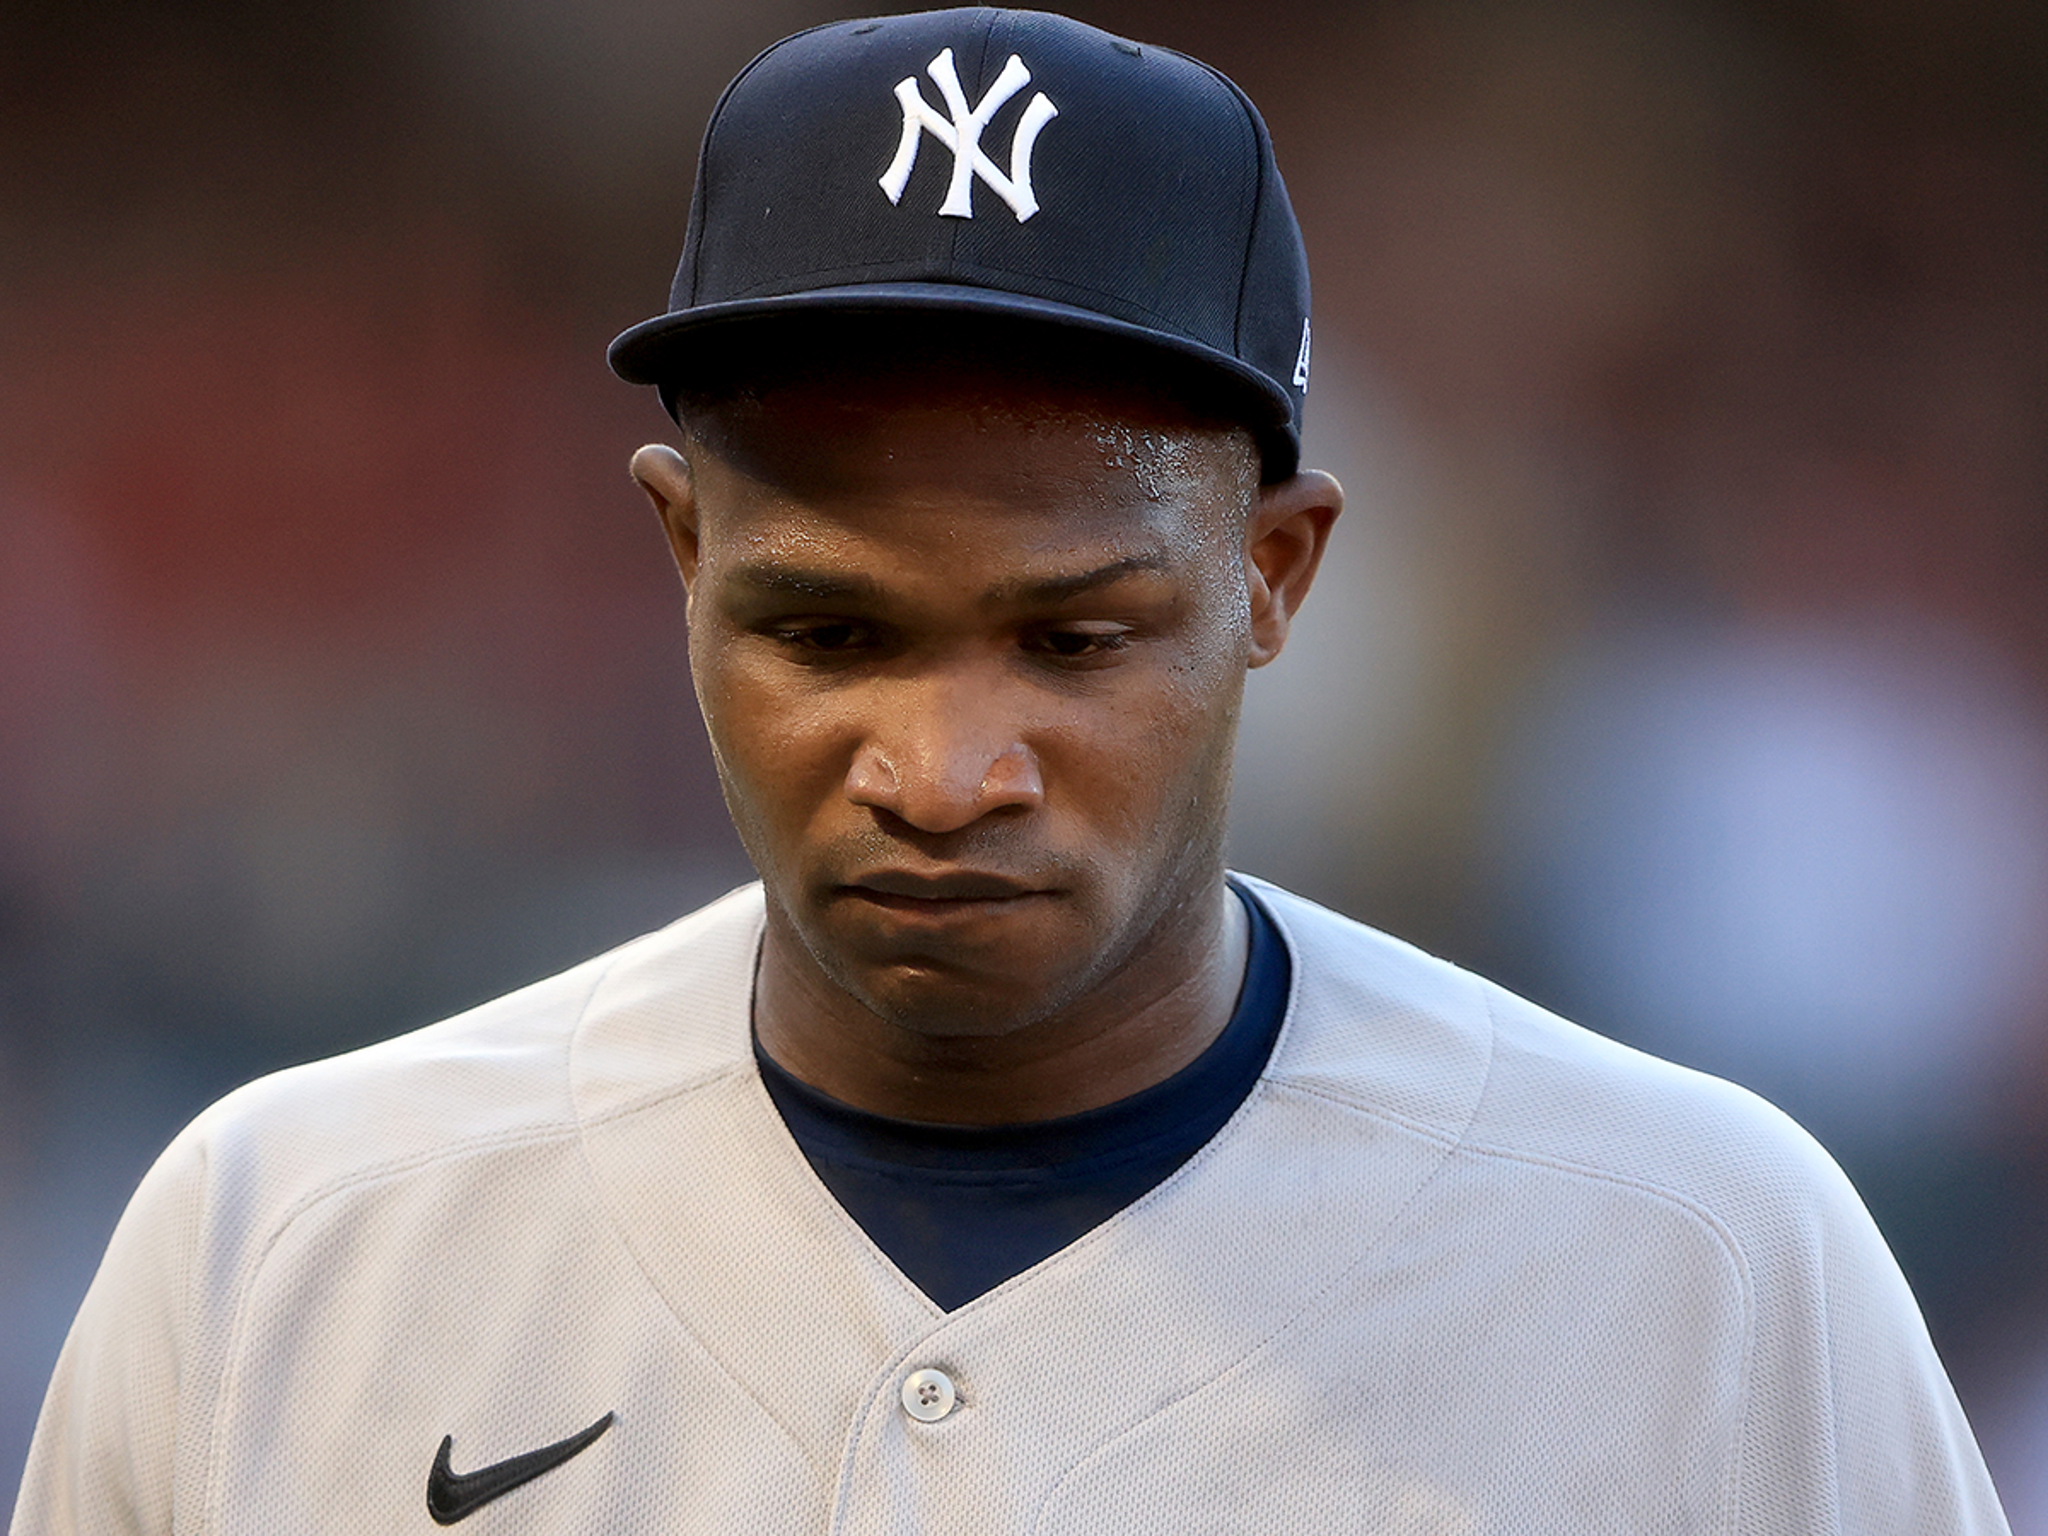 Yankees' Domingo German Going To Rehab For Alcohol Abuse, Placed